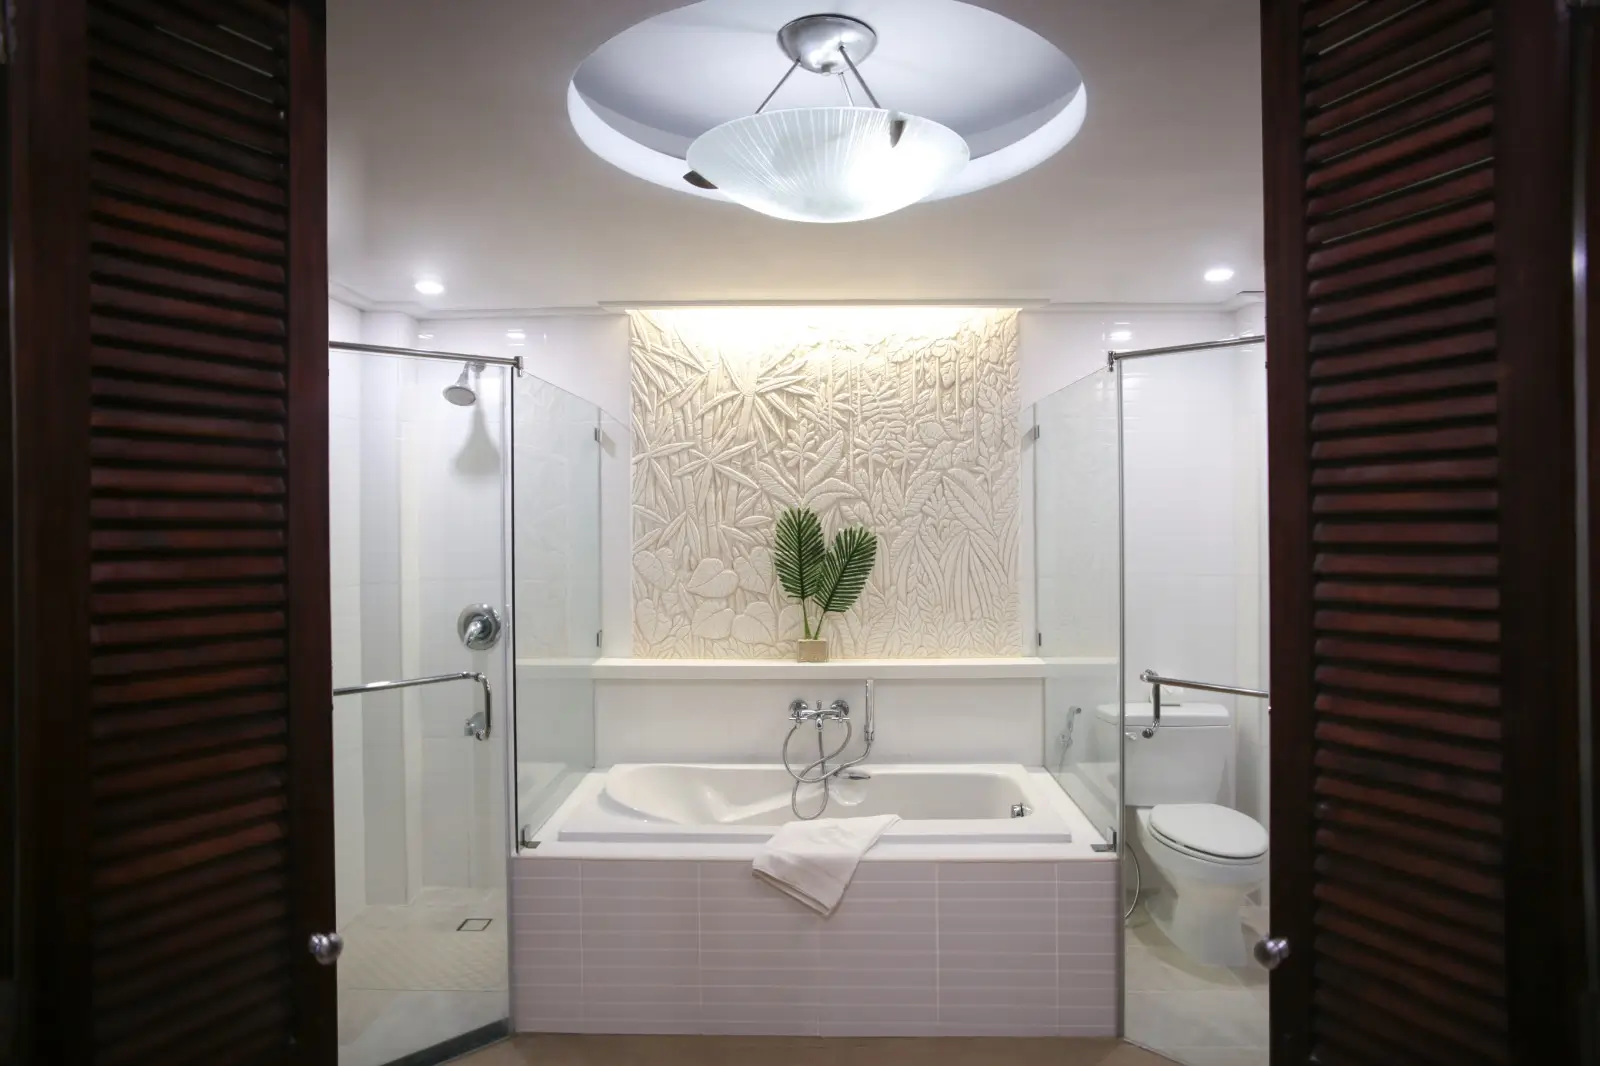 Spacious modern bathroom in Mandarin Bay Resort & Spa featuring a large white bathtub with an intricately carved tropical design on the wall above, and a separate glass shower enclosure.